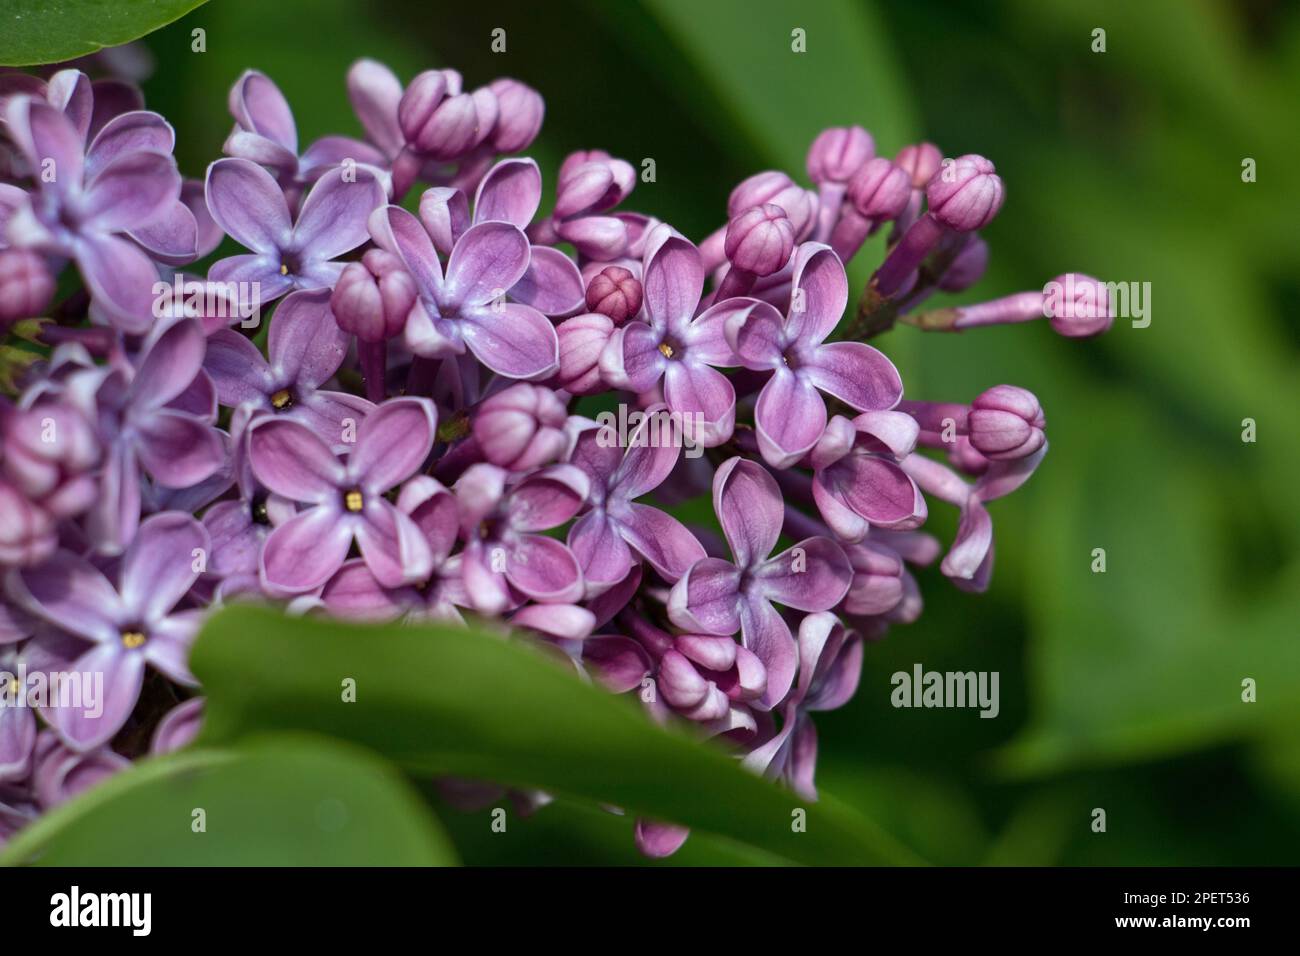 Tiny purple flowers of the lilac tree shrub, Syringa vulgaris, blooming in late spring early summer, close-up on a natural green leaf background Stock Photo